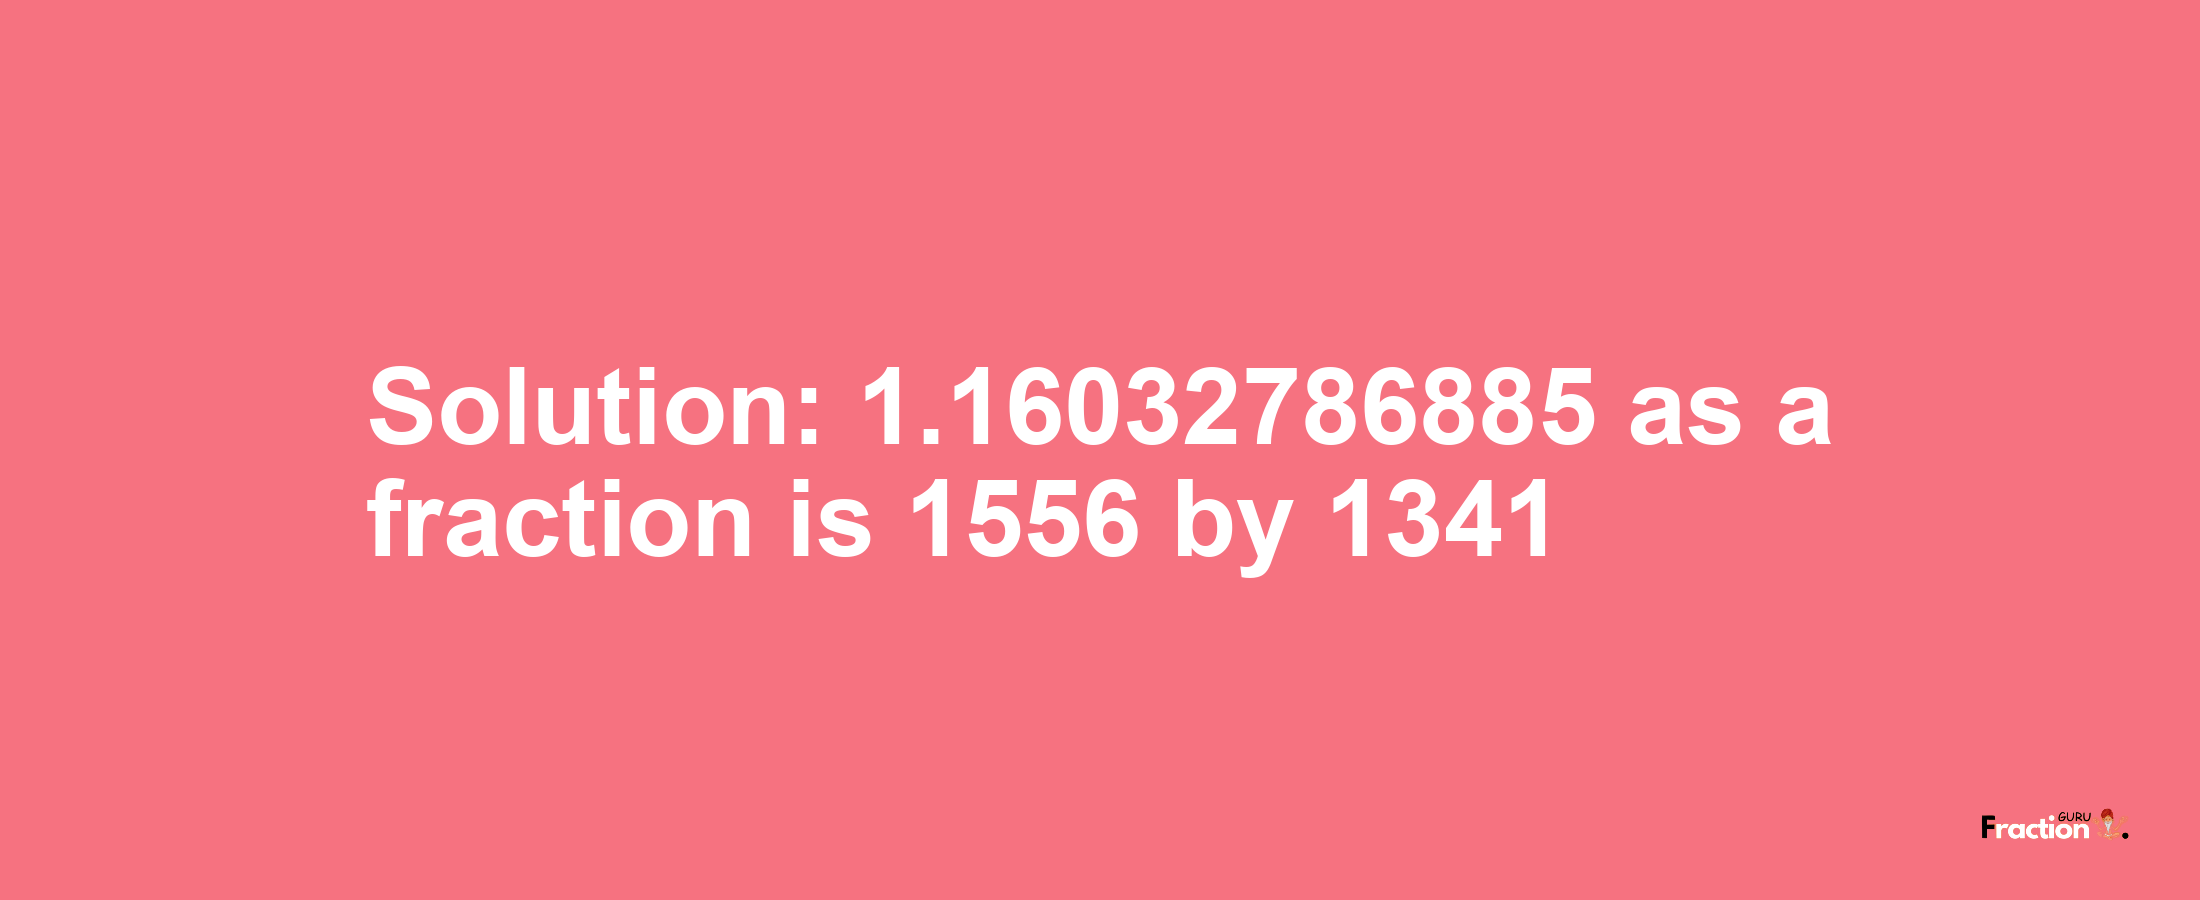 Solution:1.16032786885 as a fraction is 1556/1341